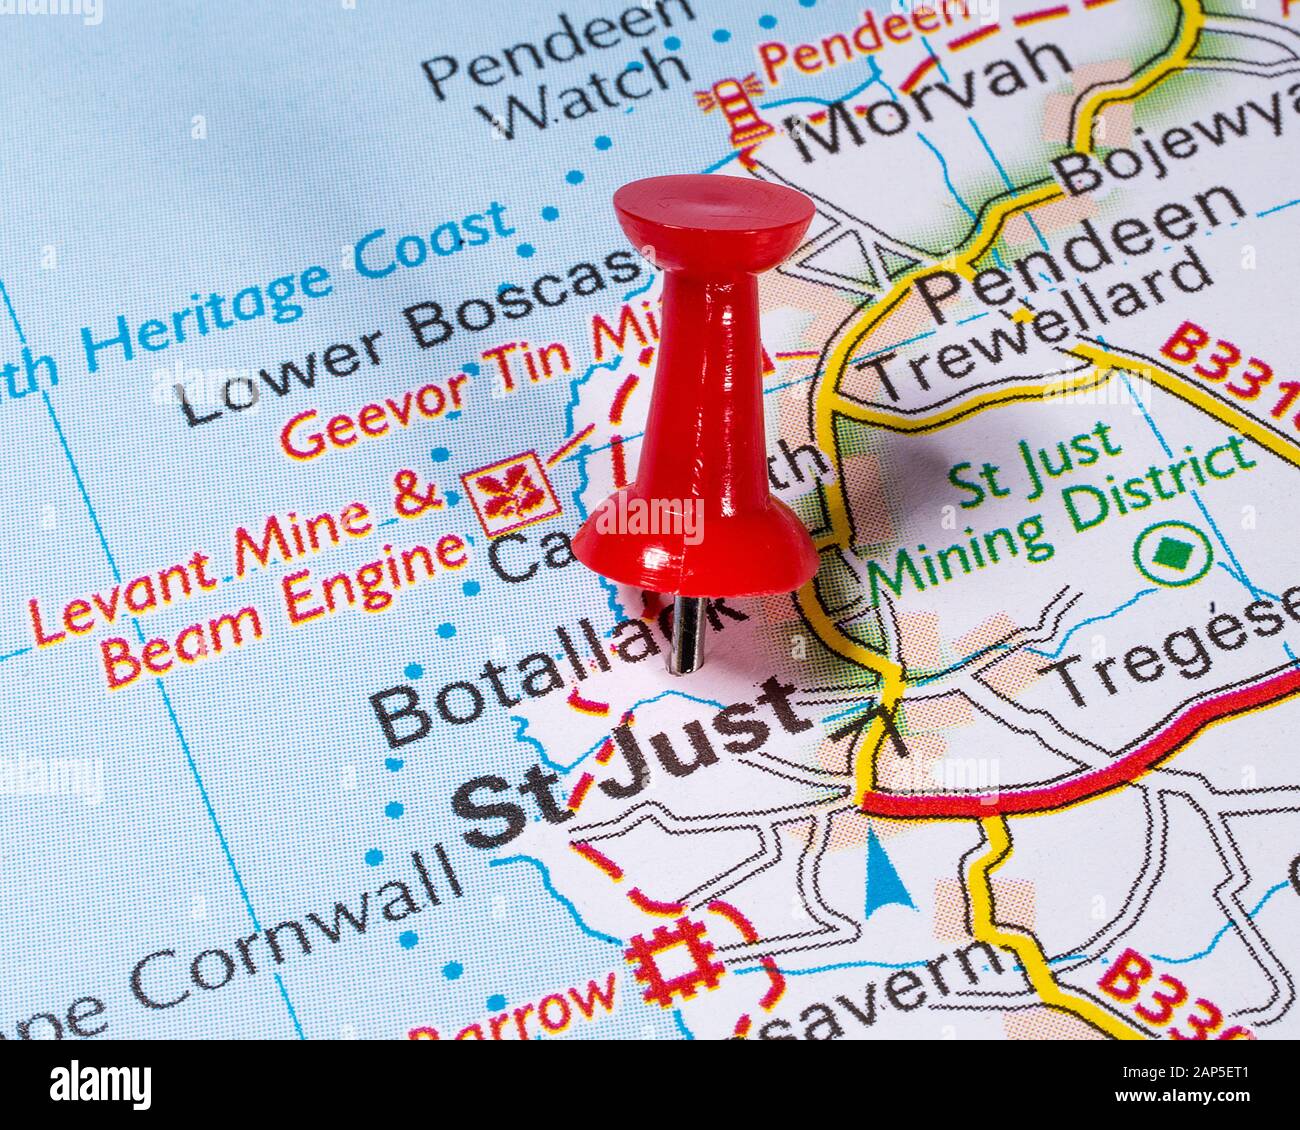 Close-up of a map pin marking the location of St. Just in Penwith ...